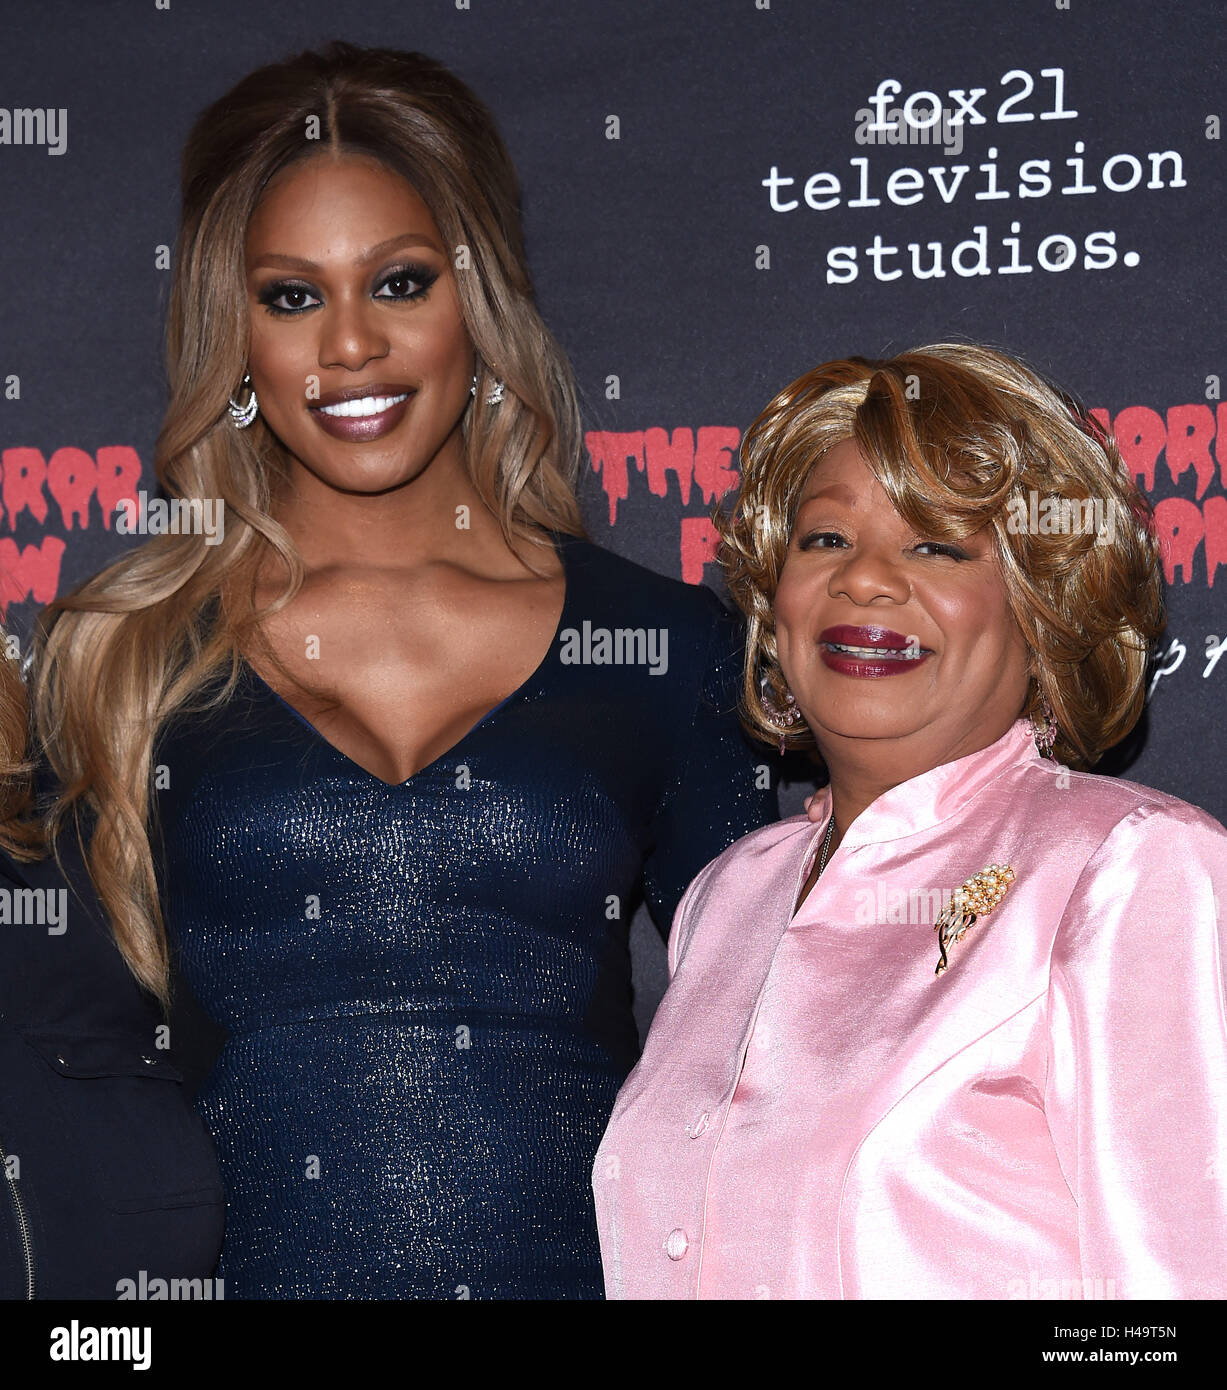 West Hollywood, California, USA. 13th Oct, 2016. Laverne Cox and Gloria Cox arrives for the premiere of ''The Rocky Horror Picture Show; Let's Do The Time Warp Again'' Premiere at the Roxy theater. Credit:  Lisa O'Connor/ZUMA Wire/Alamy Live News Stock Photo